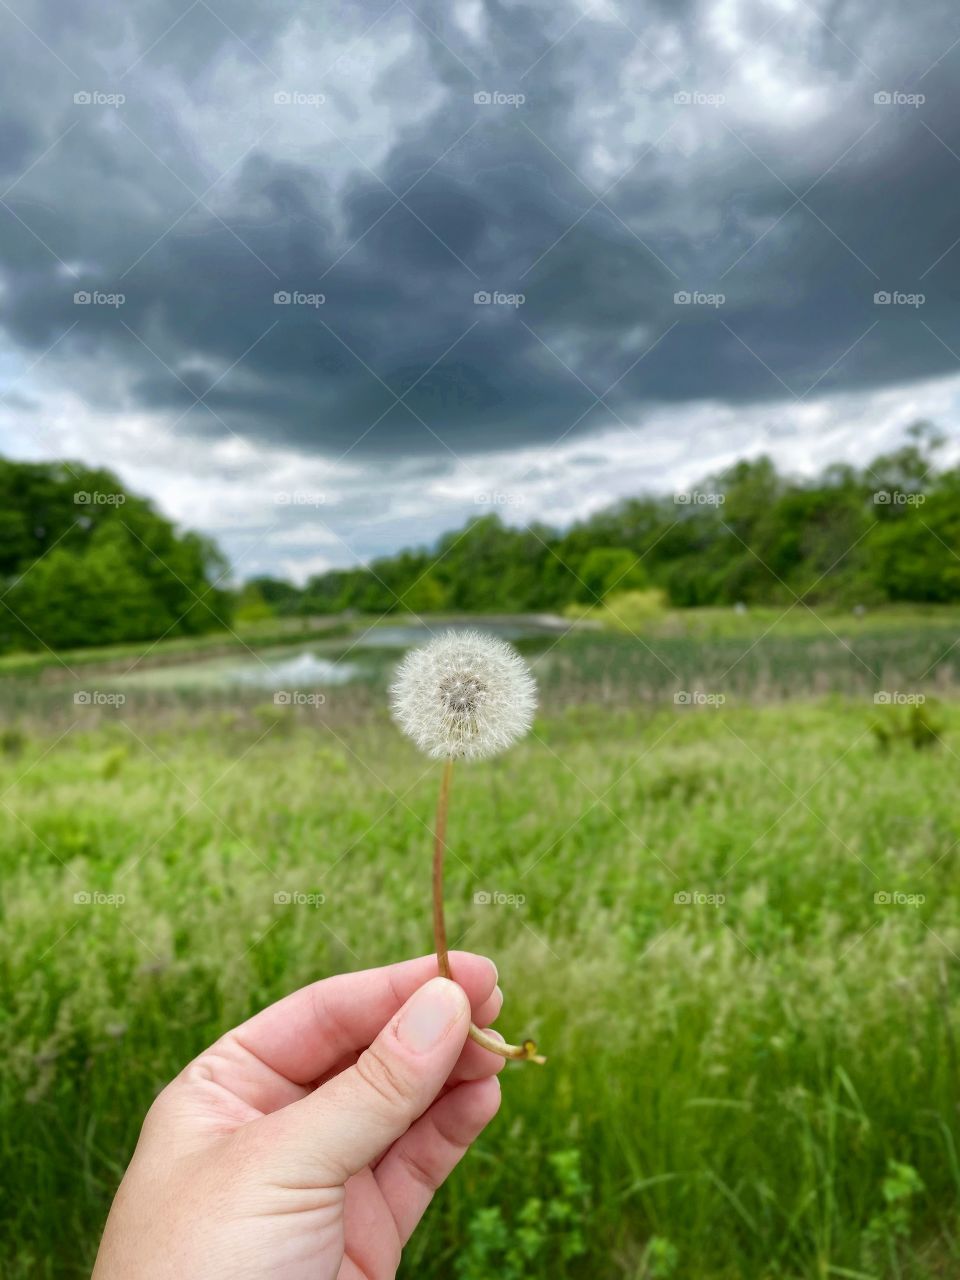 A dandelion ready for wish making on a grassy field near a small pond on an overcast day in Ohio 